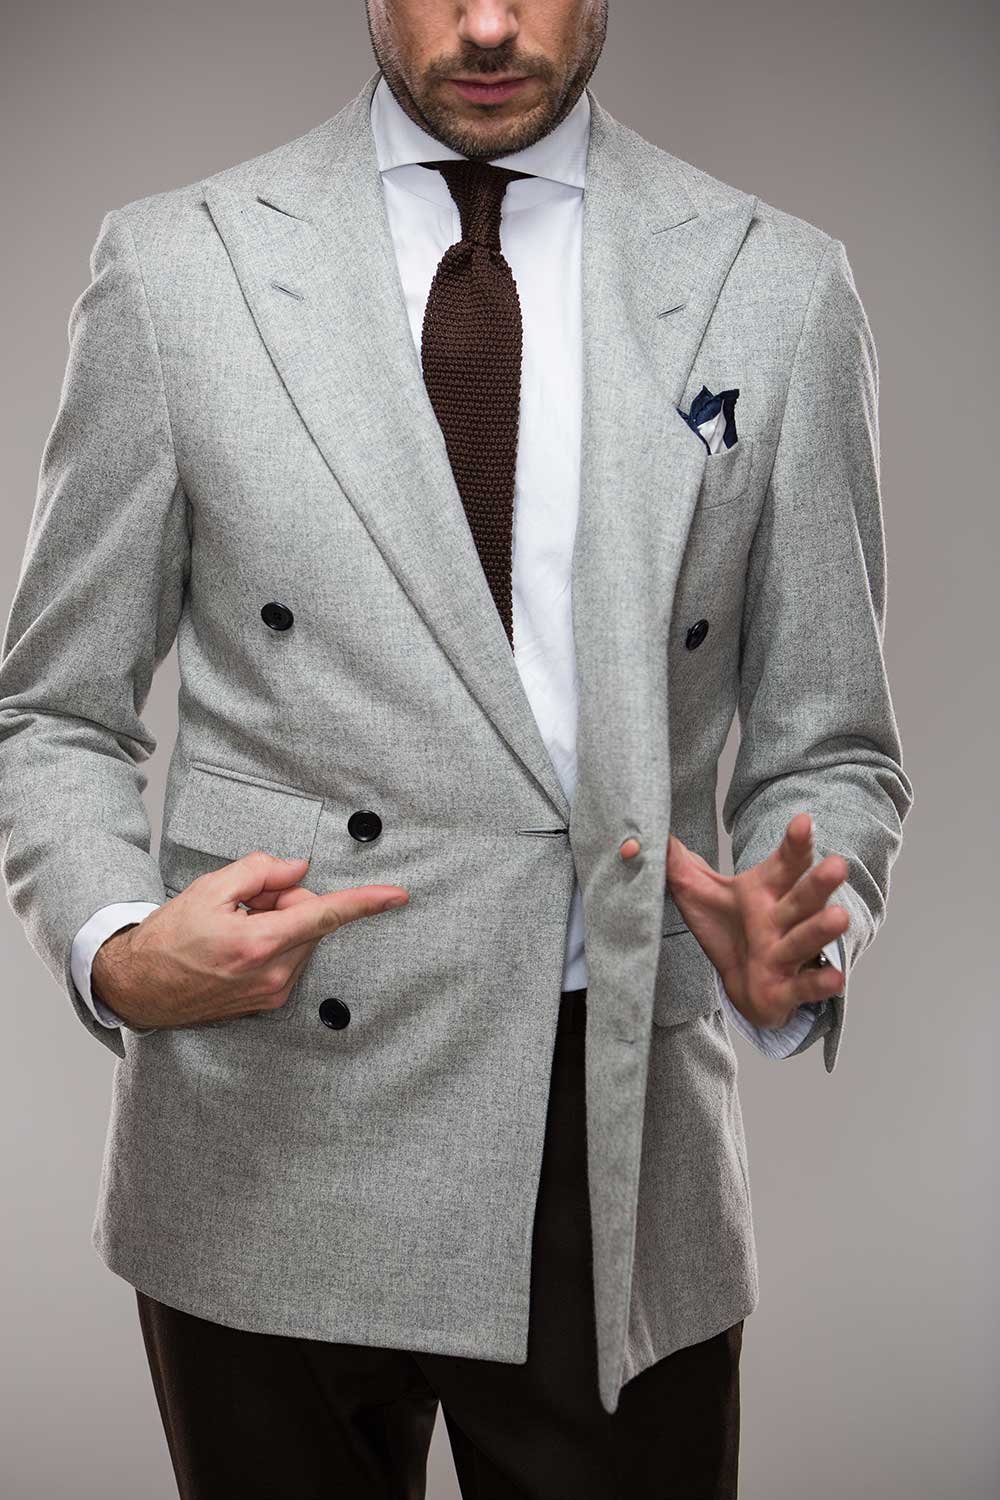 how to button double breasted suit jacket